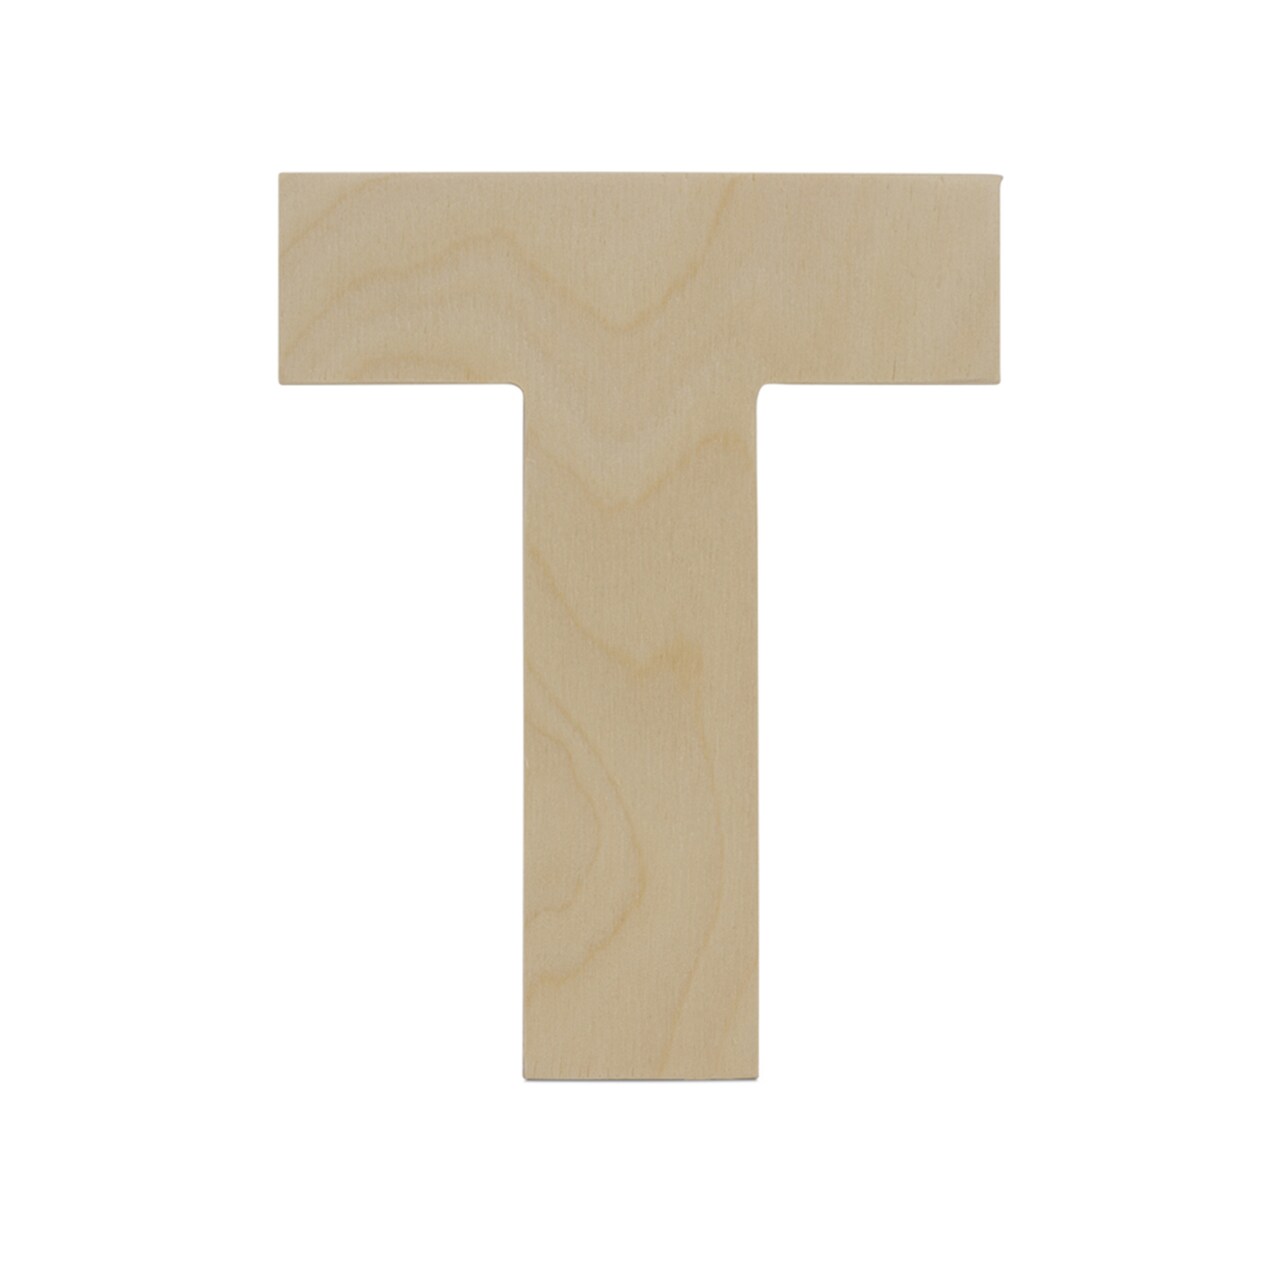 Wooden Letter T 12 inch or 8 inch, Unfinished Large Wood Letters for Crafts | Woodpeckers